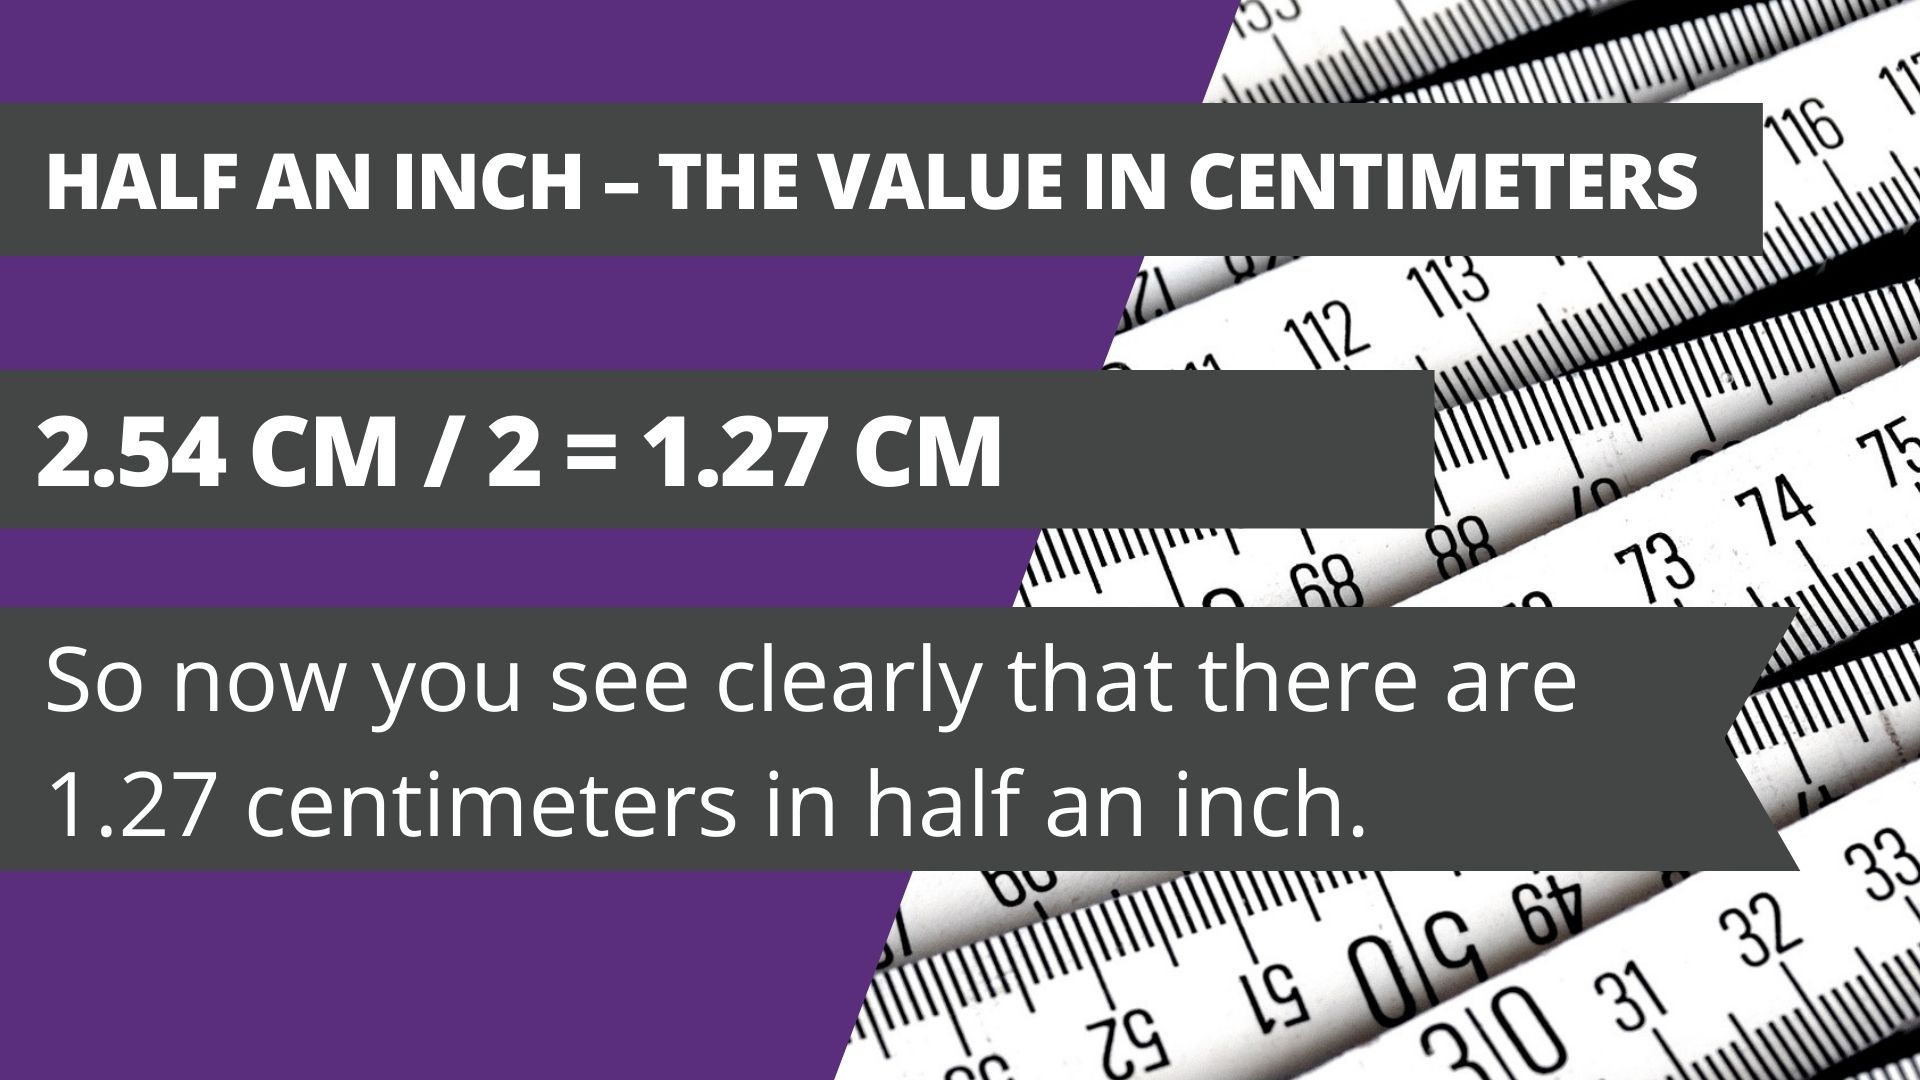 Half an inch – the value in centimeters